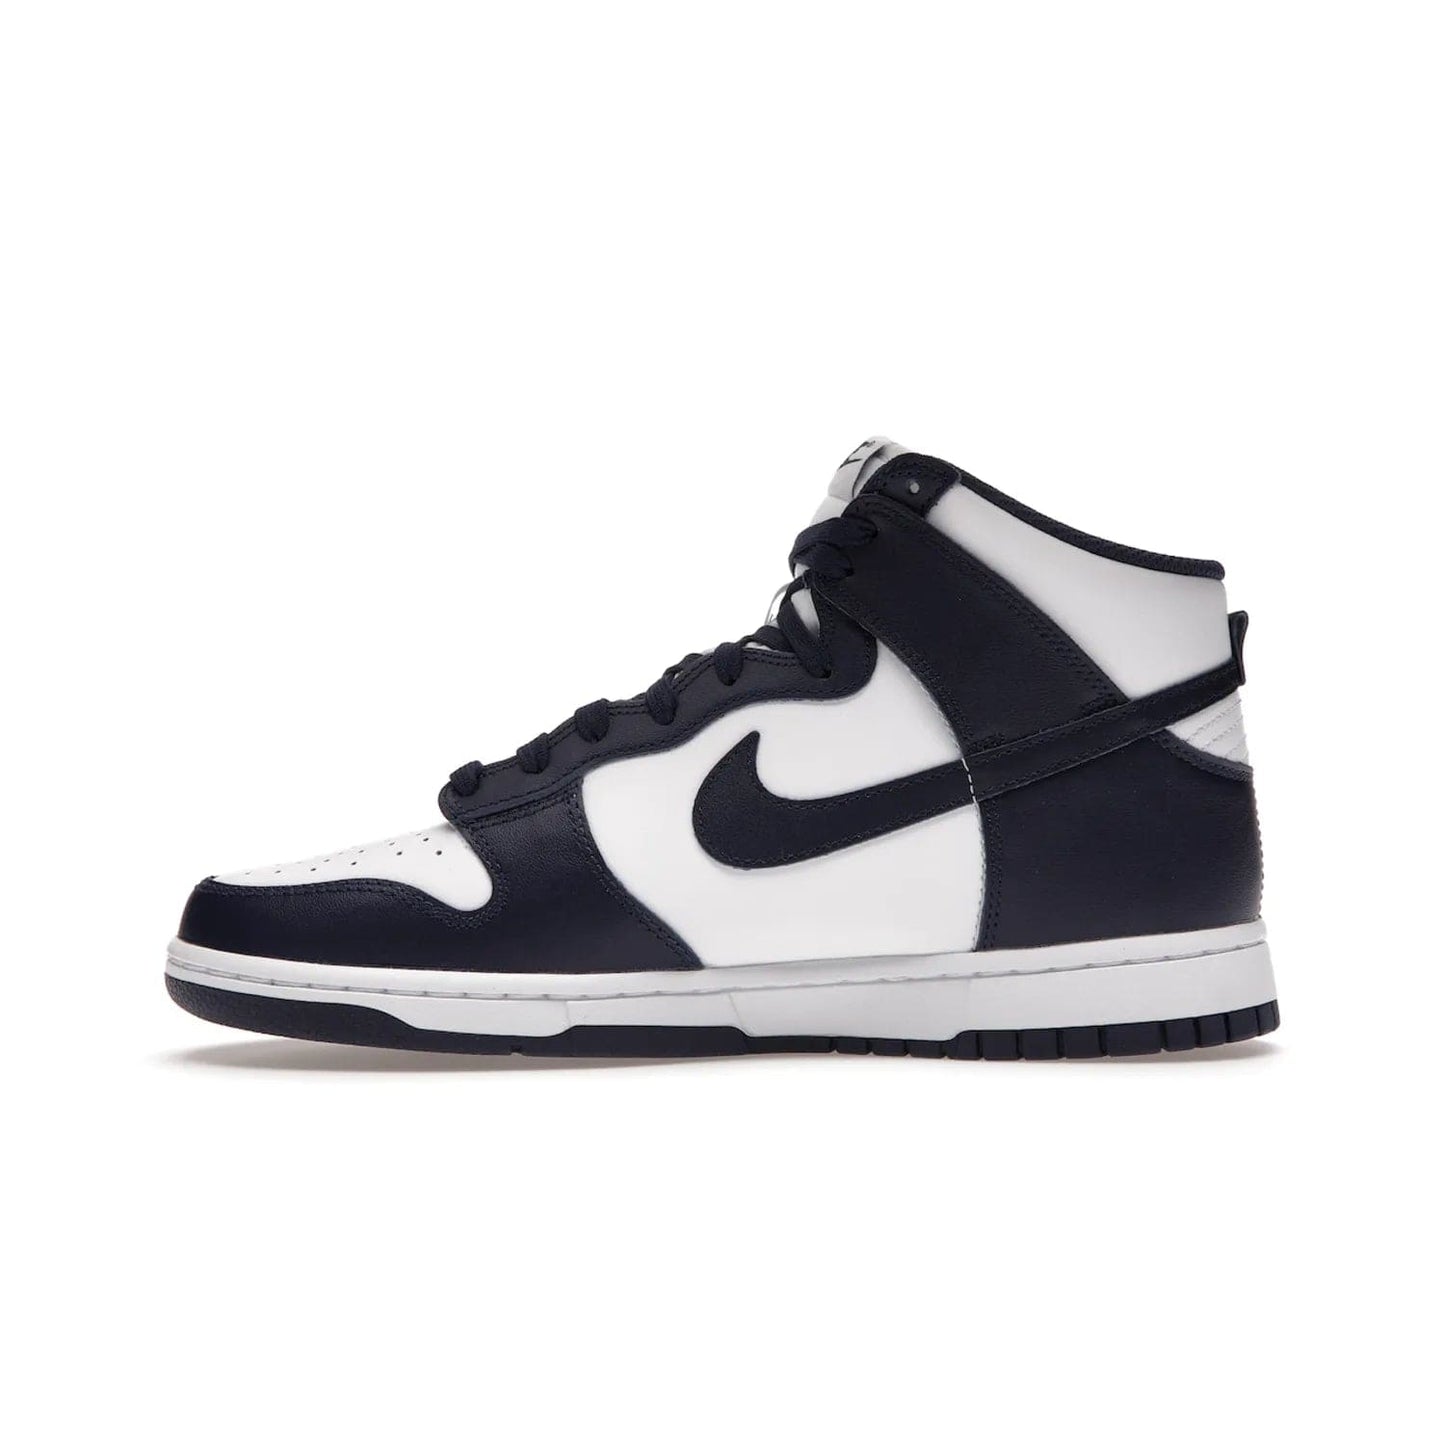 Nike Dunk High Championship Navy - Image 19 - Only at www.BallersClubKickz.com - Classic Nike Dunk High sneaker delivers an unforgettable style with white leather upper, Championship Navy overlays, and matching woven tongue label and sole. Make a statement with the Championship Navy today.